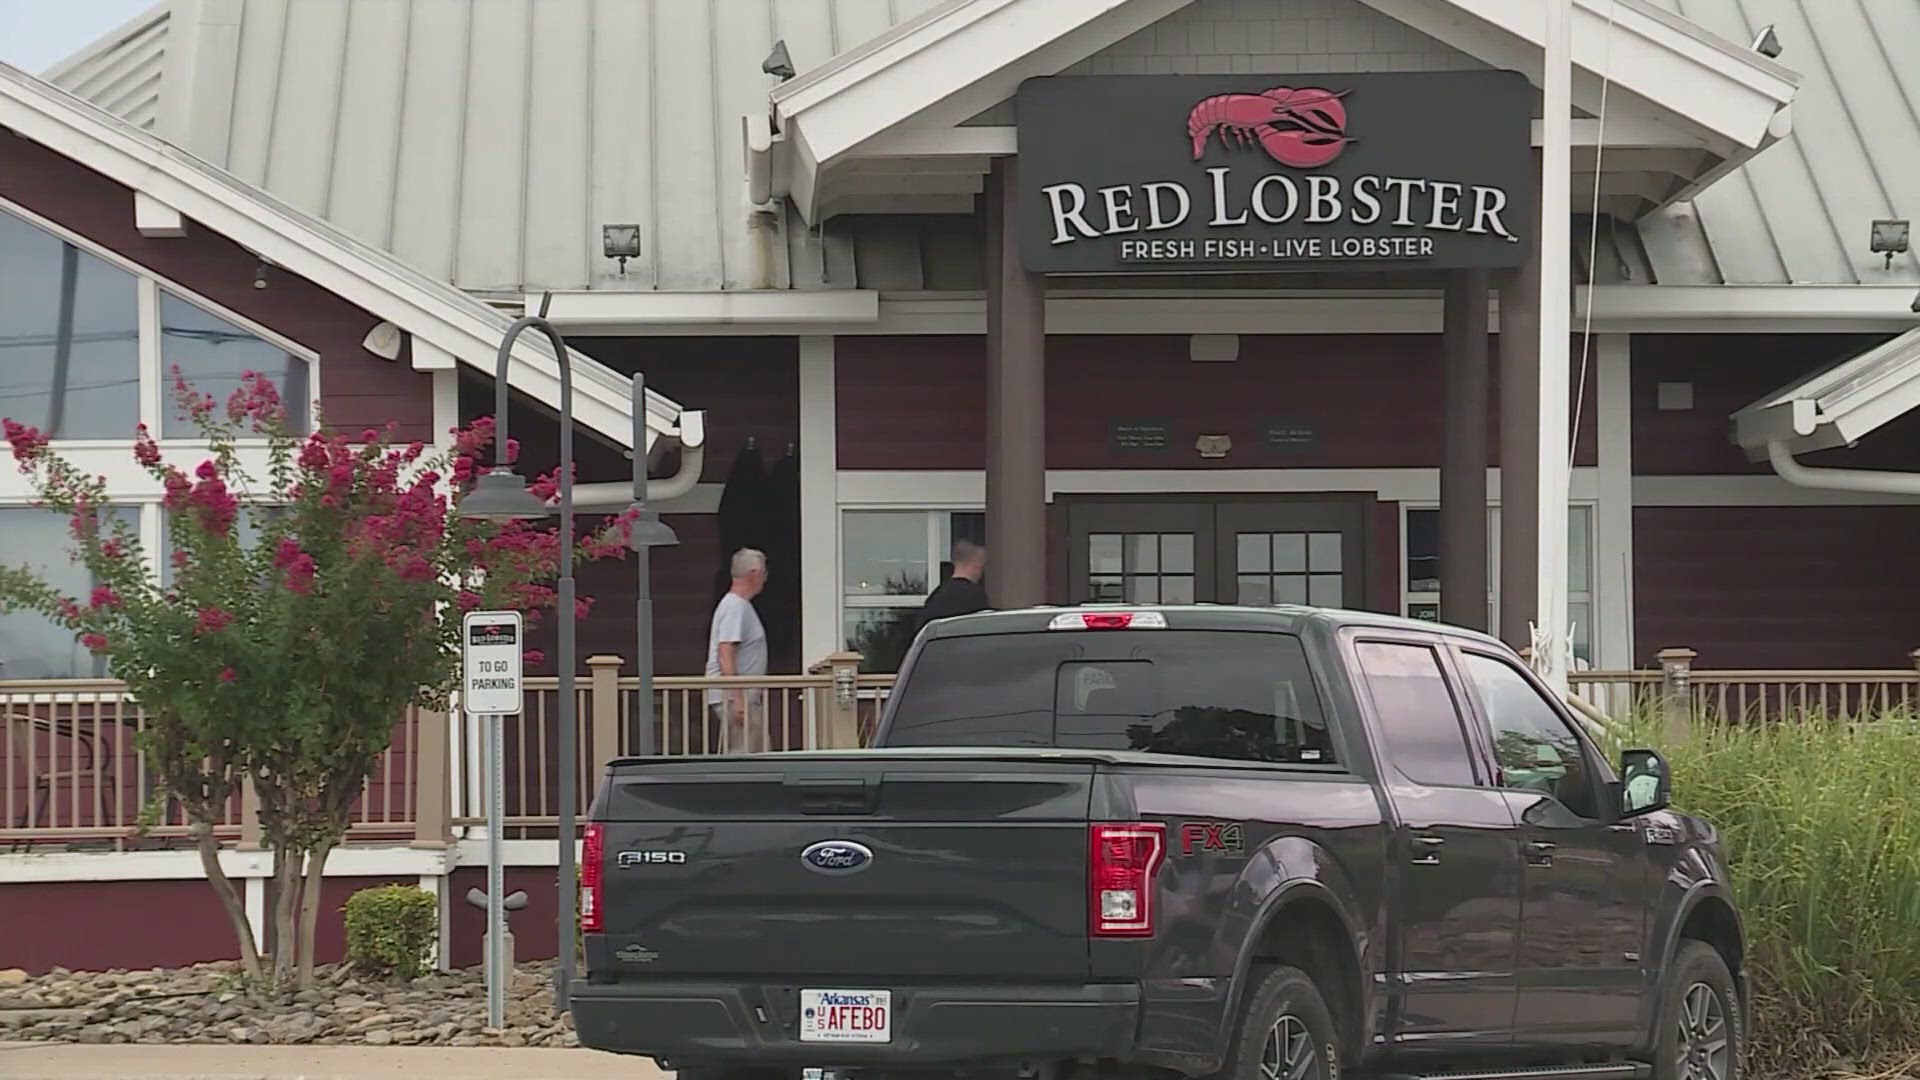 The sea food chain says the next round of closures includes locations where they can't renegotiate their leases.